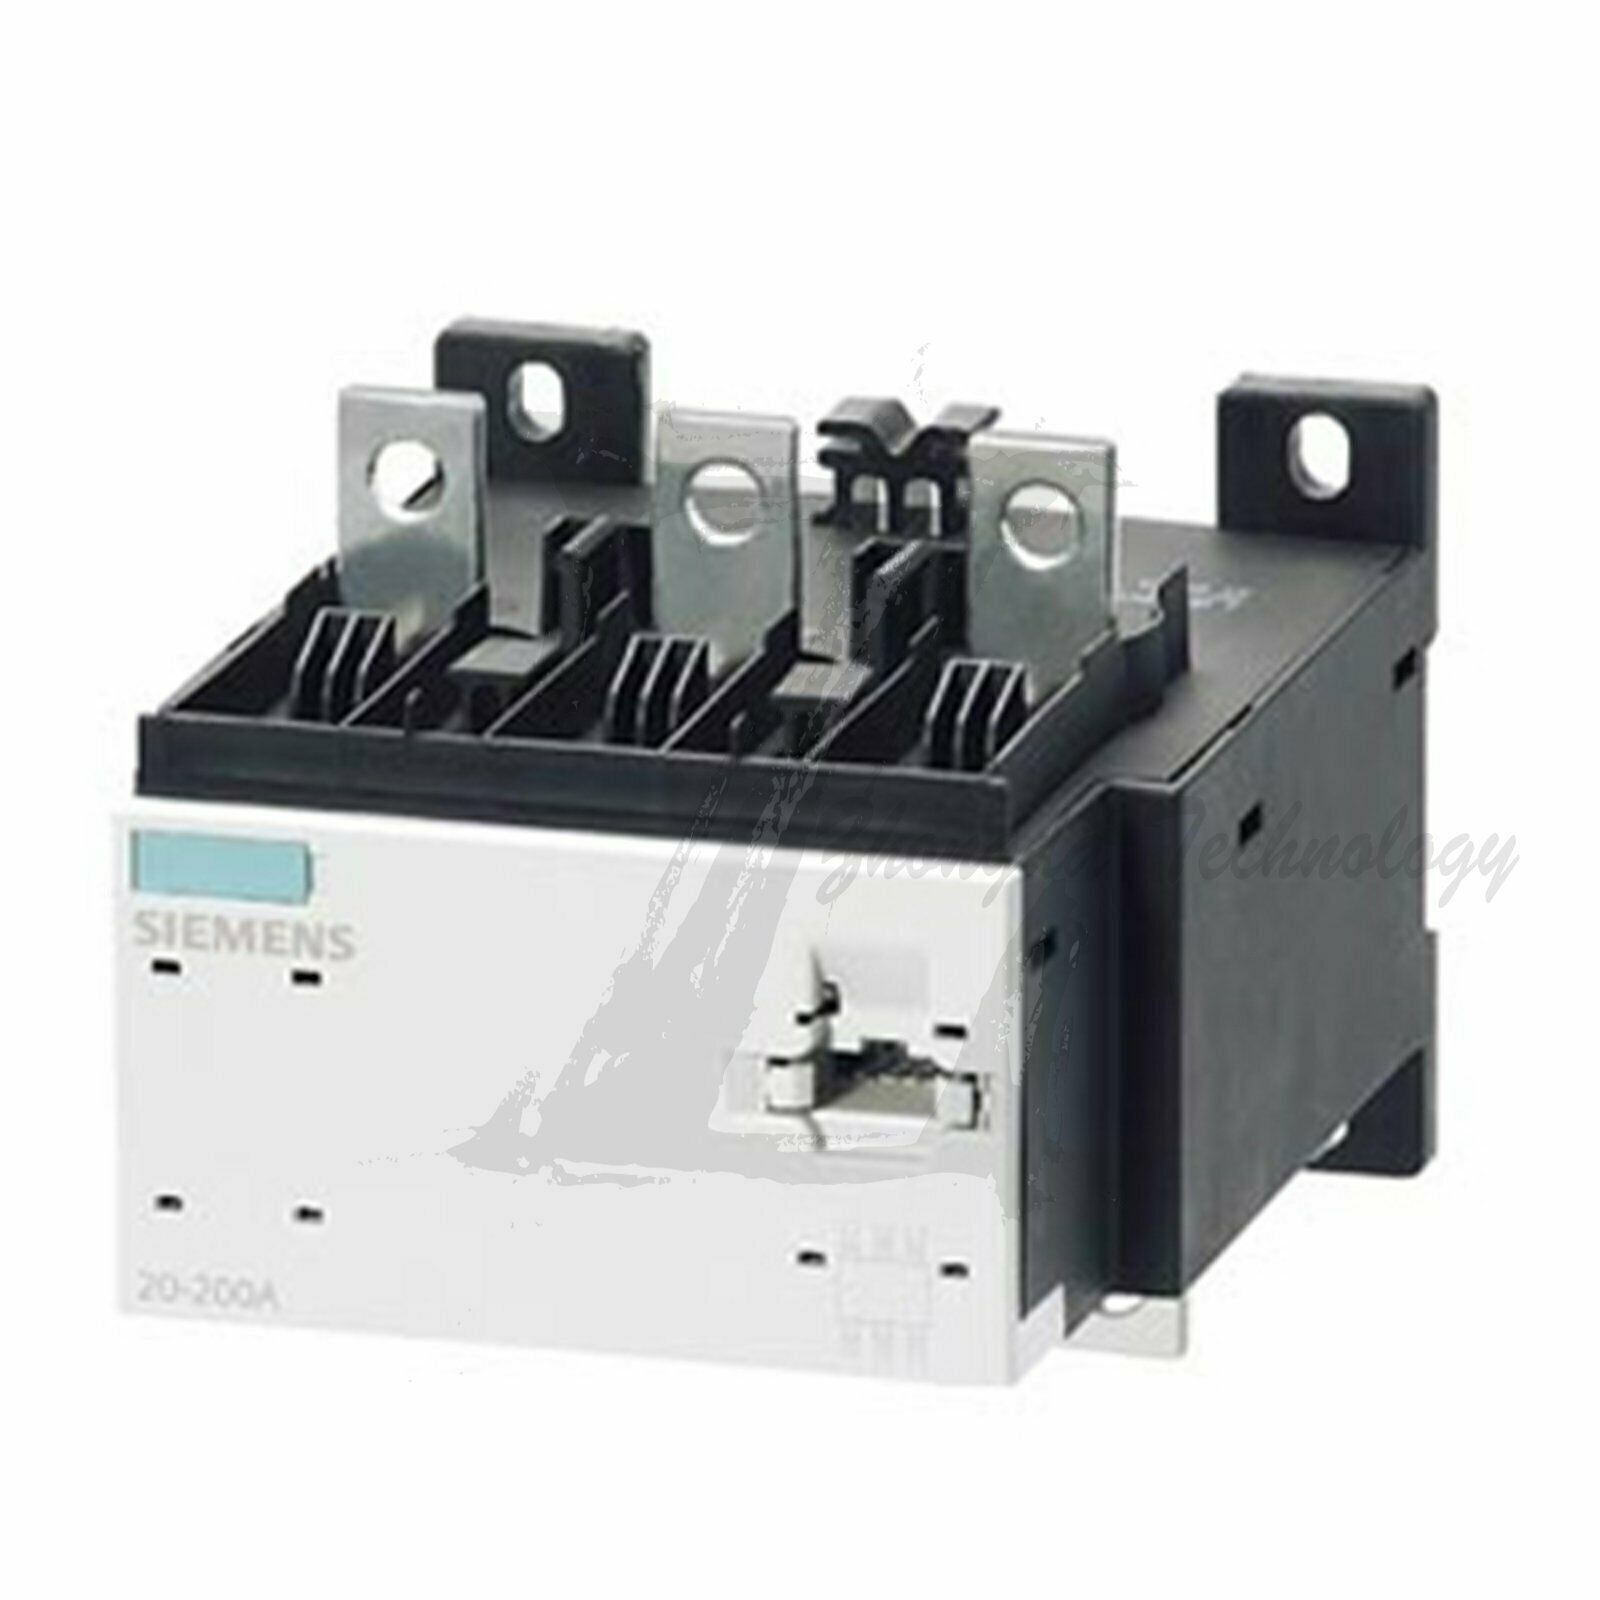 Siemens, Current Measuring Module, 110 to 690 V ac, 20 to 200 A,3UF7103-1AA00-0